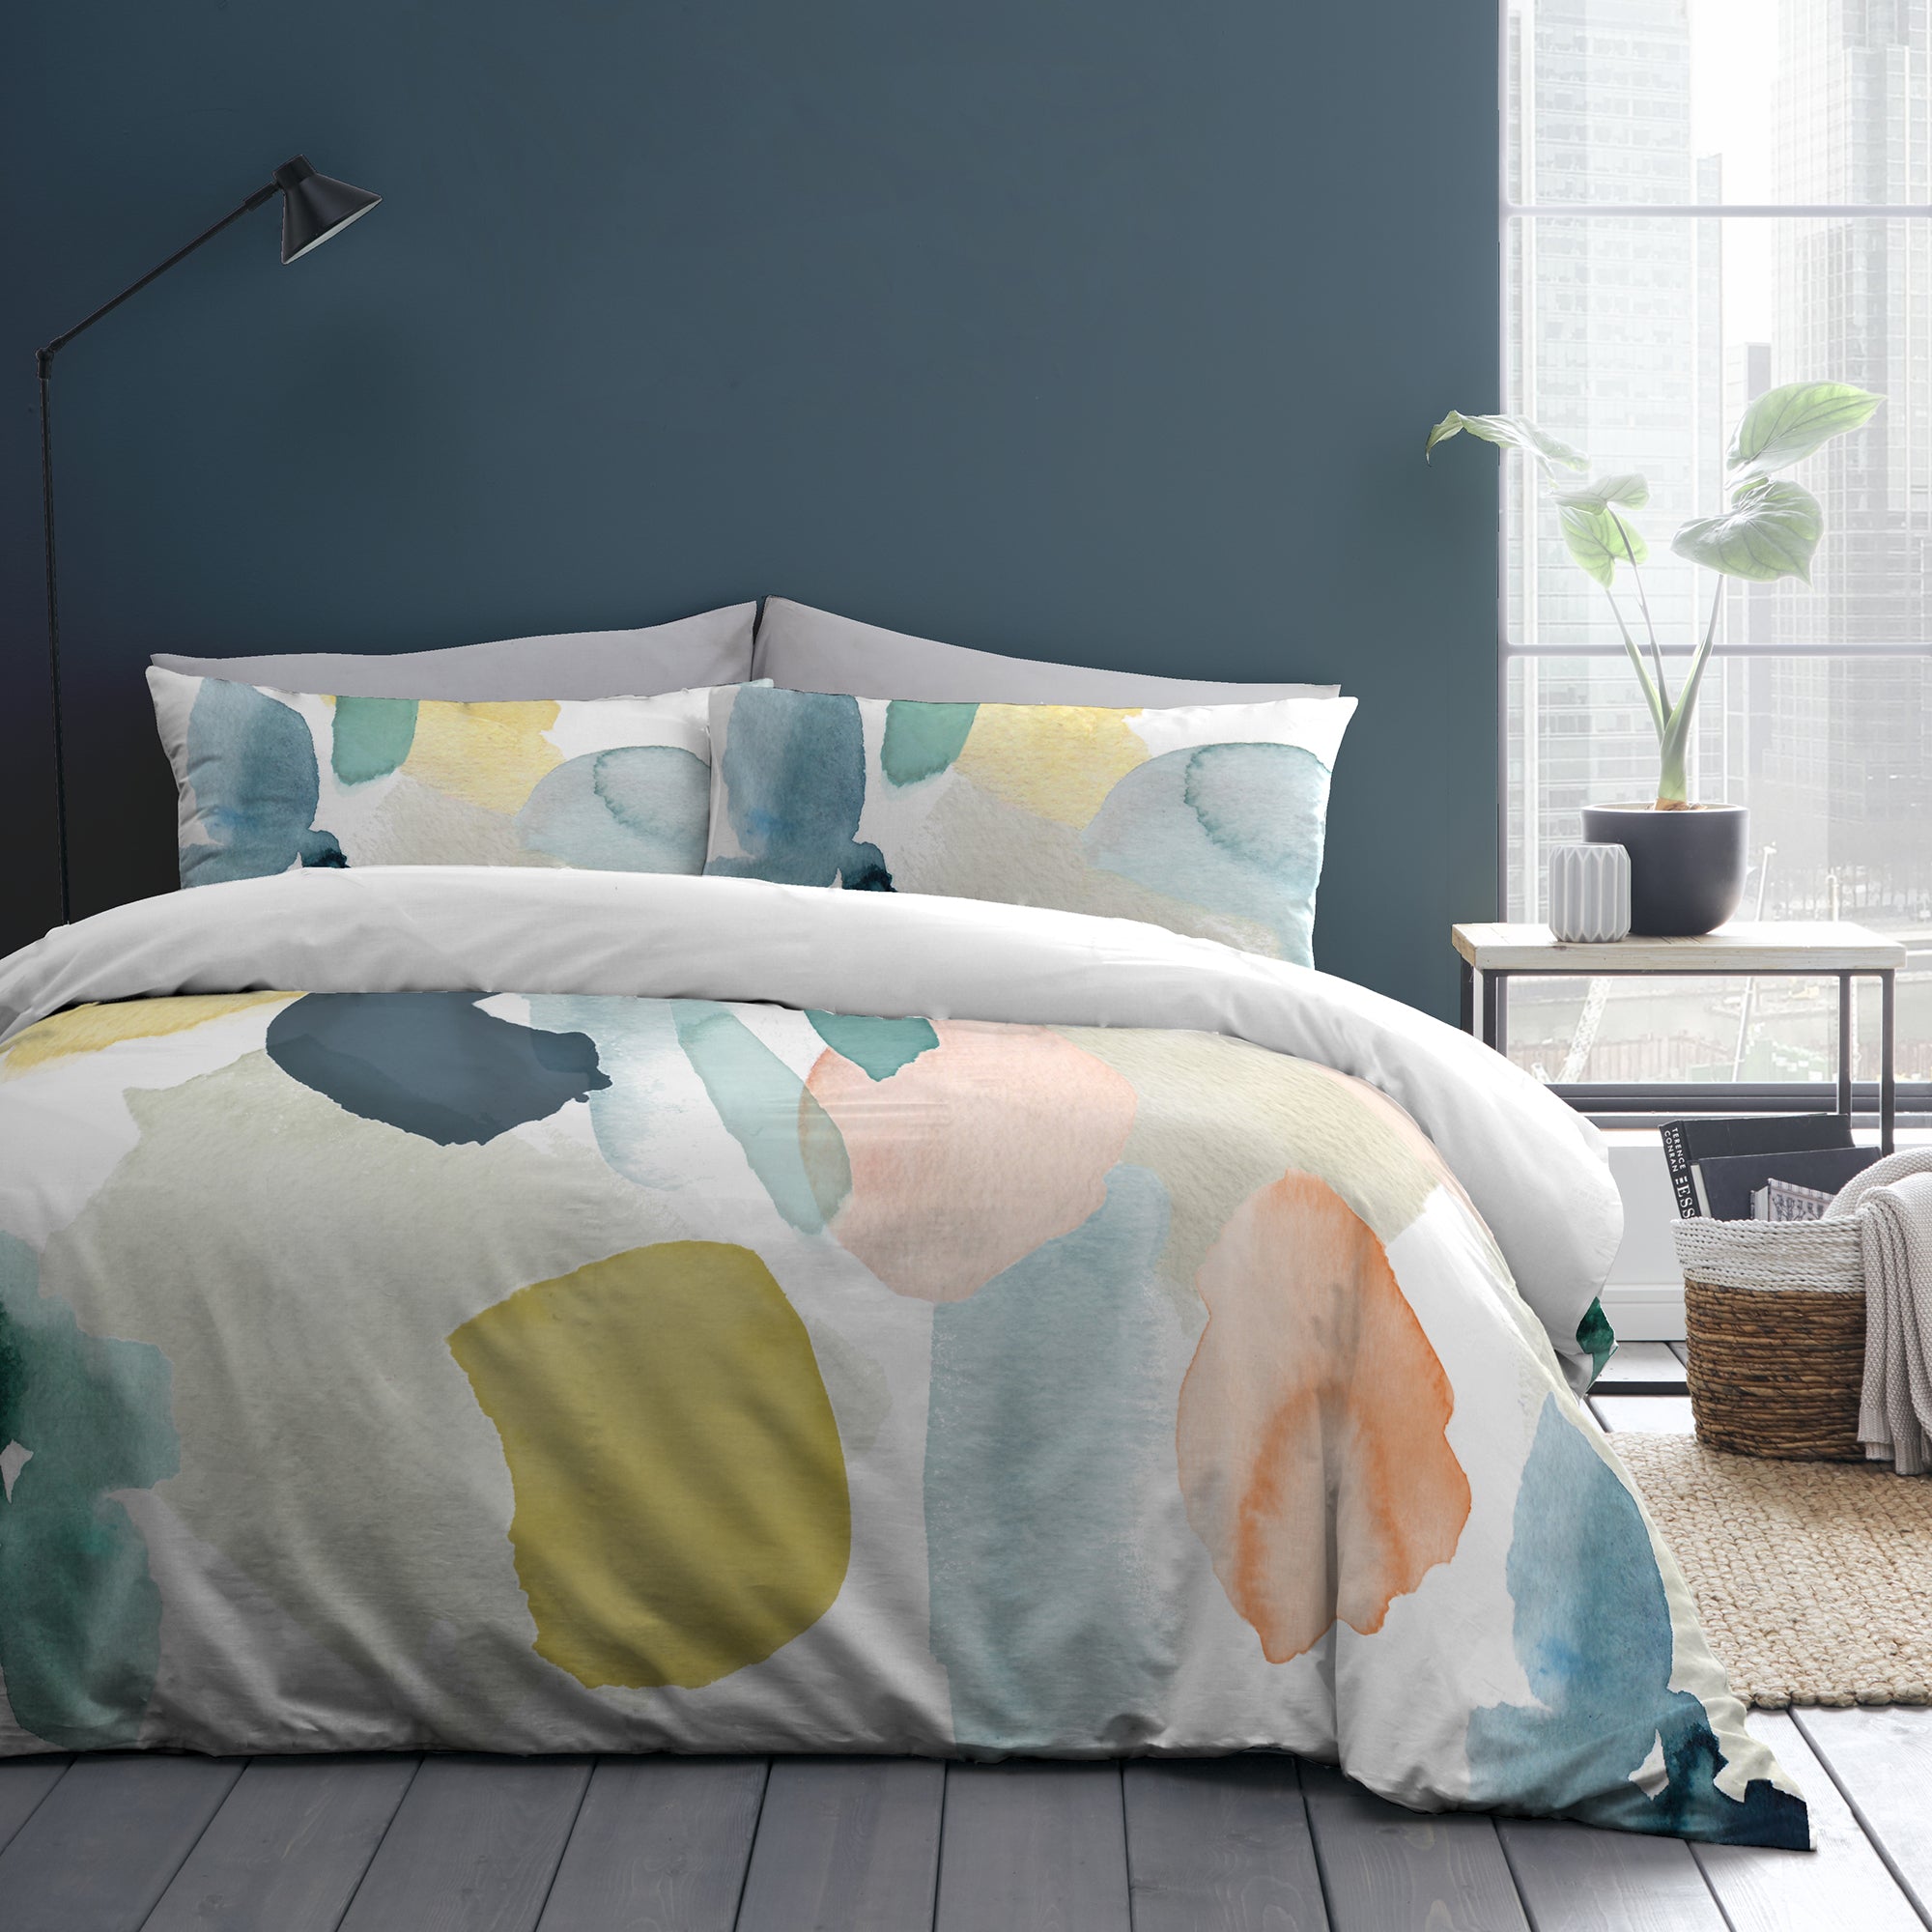 Solice - 100% Cotton Duvet Cover Set in Multi by Appletree Style